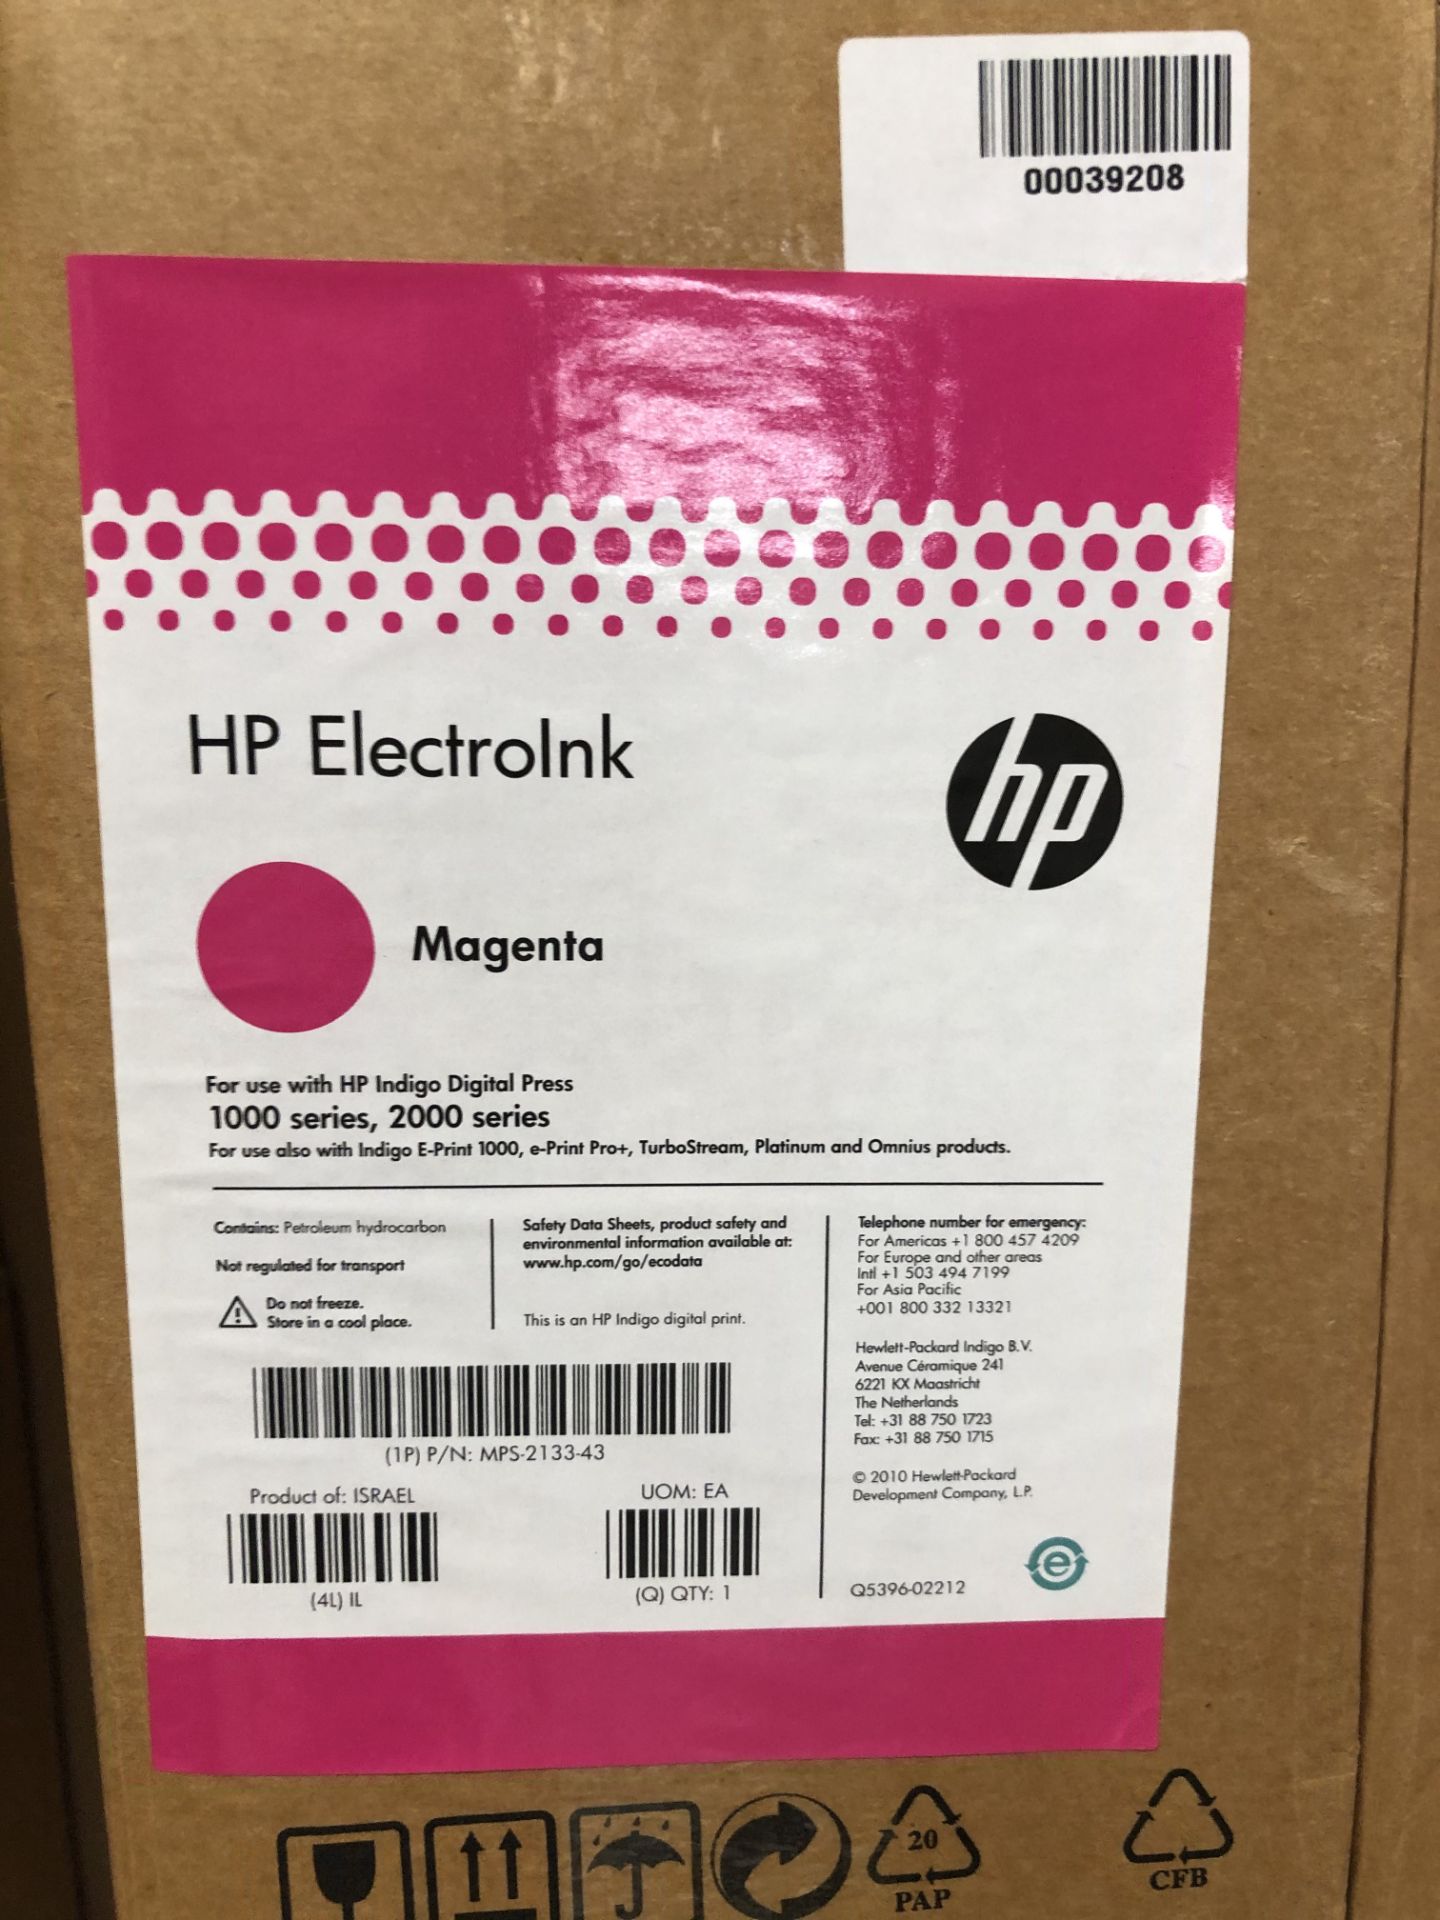 50 Cans of HP ElectroInk Magenta to suit HP Indigo Digital Press 1000 & 2000 Series (to 5 boxes) ( - Bild 2 aus 2